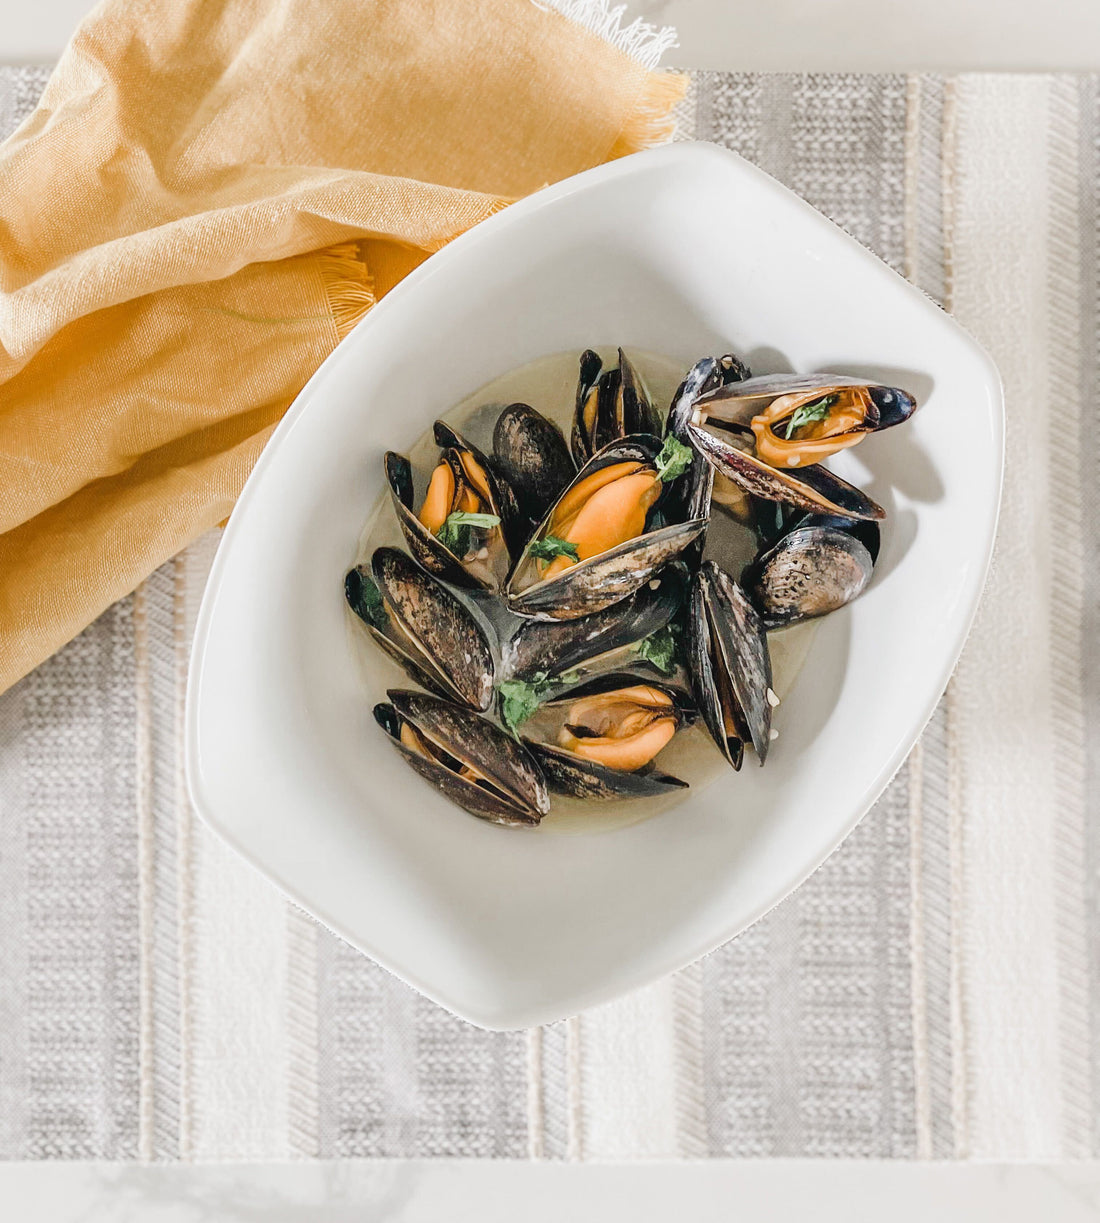 Portuguese-Style Mussels - May 13 - Our Lady of Fatima